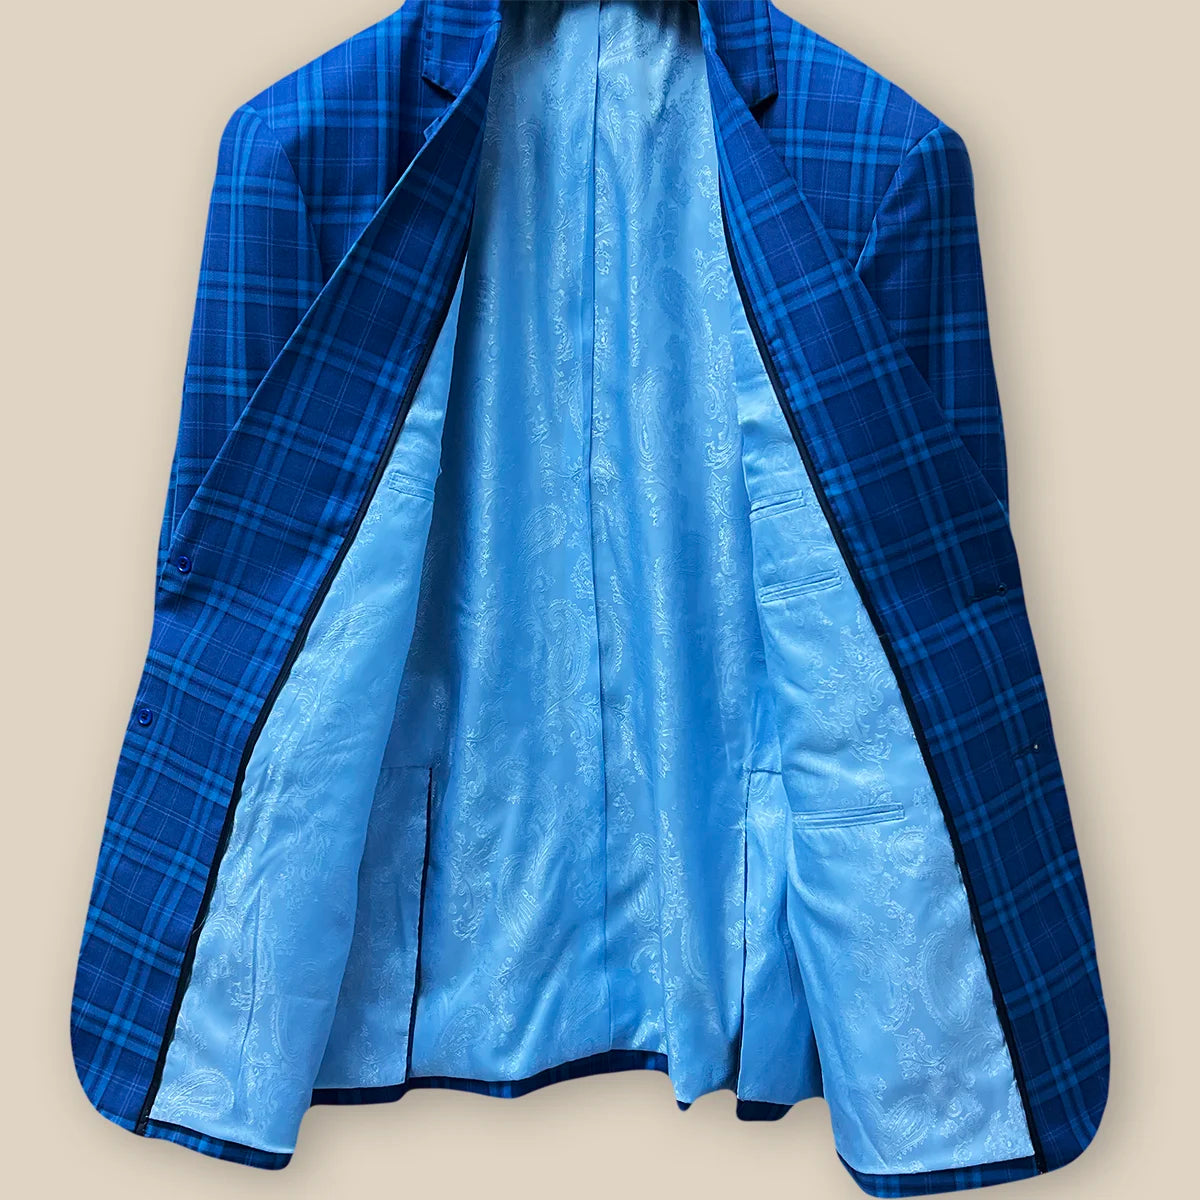 Inside view displaying the overall inner construction of a colbalt blue checkered plaid men's sport coat.